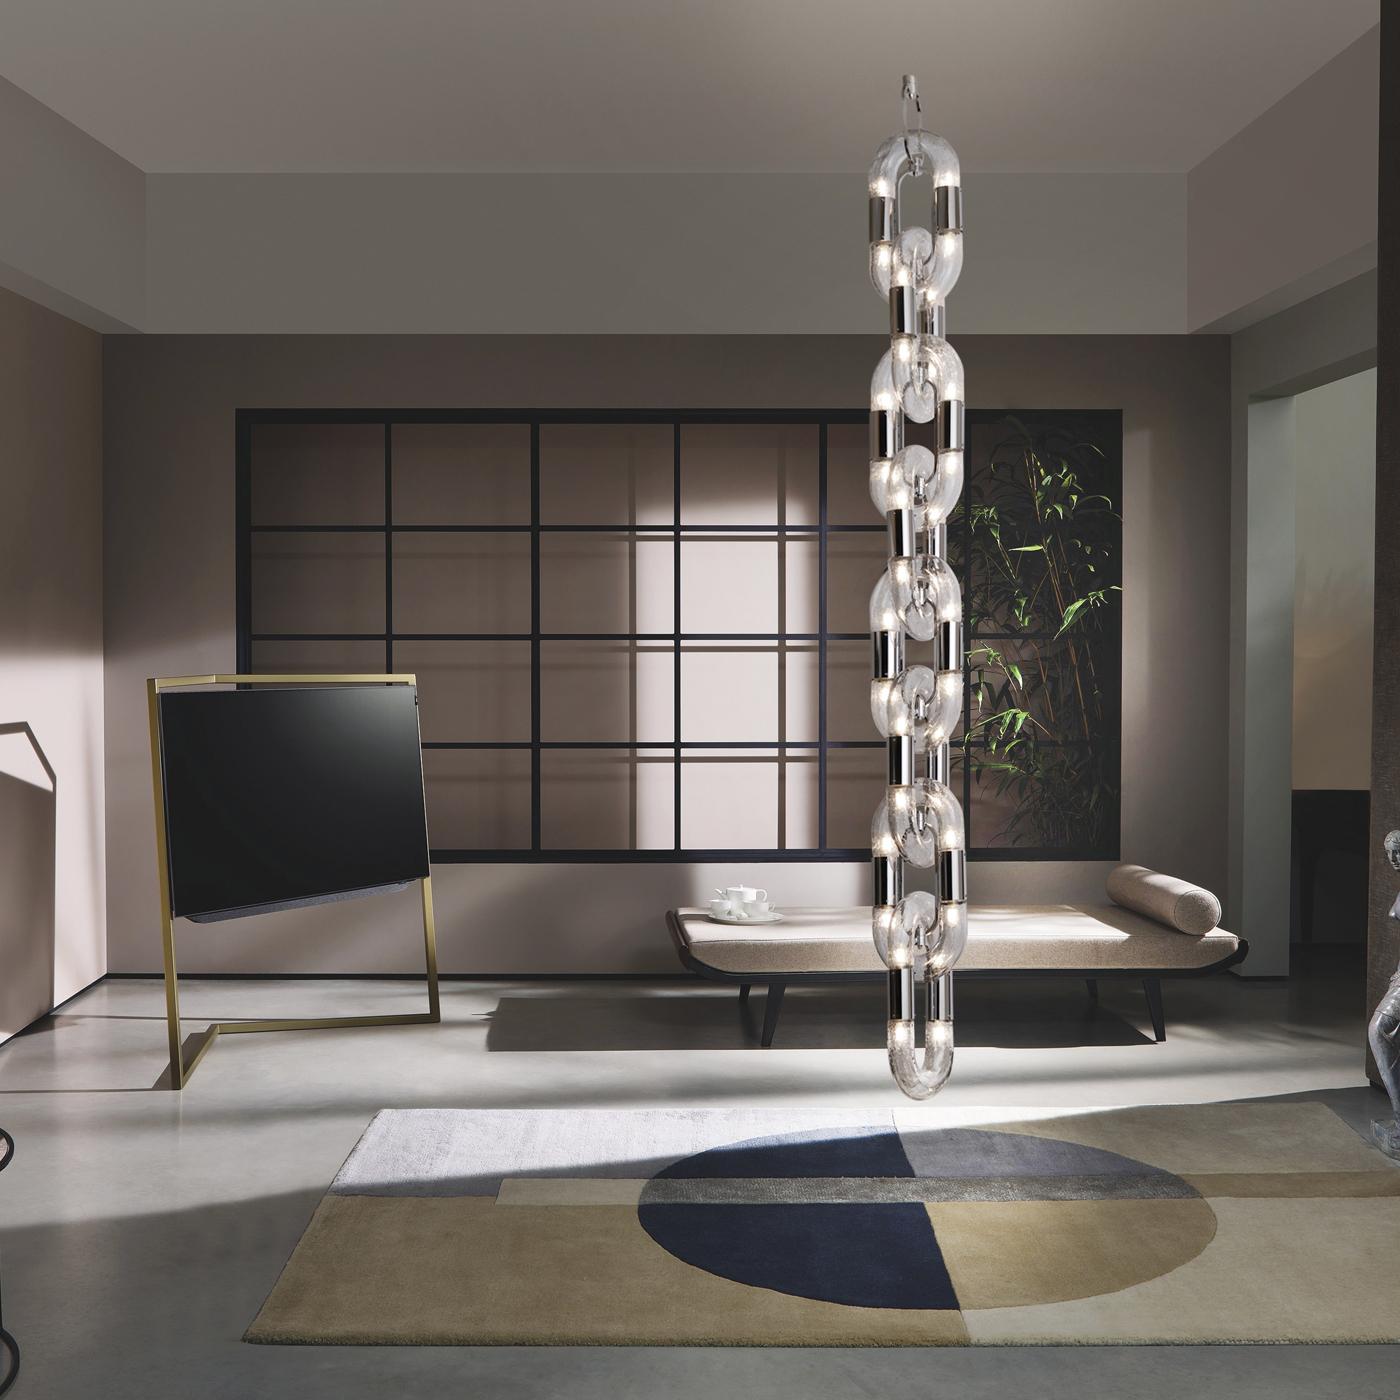 Masterfully merging metal and lighting need, Stillux's designers created a sophisticated chandelier of unparalleled contemporary allure. Its silhouette comprises eight interlocking links that serve as diffusers in transparent glass hosting each four